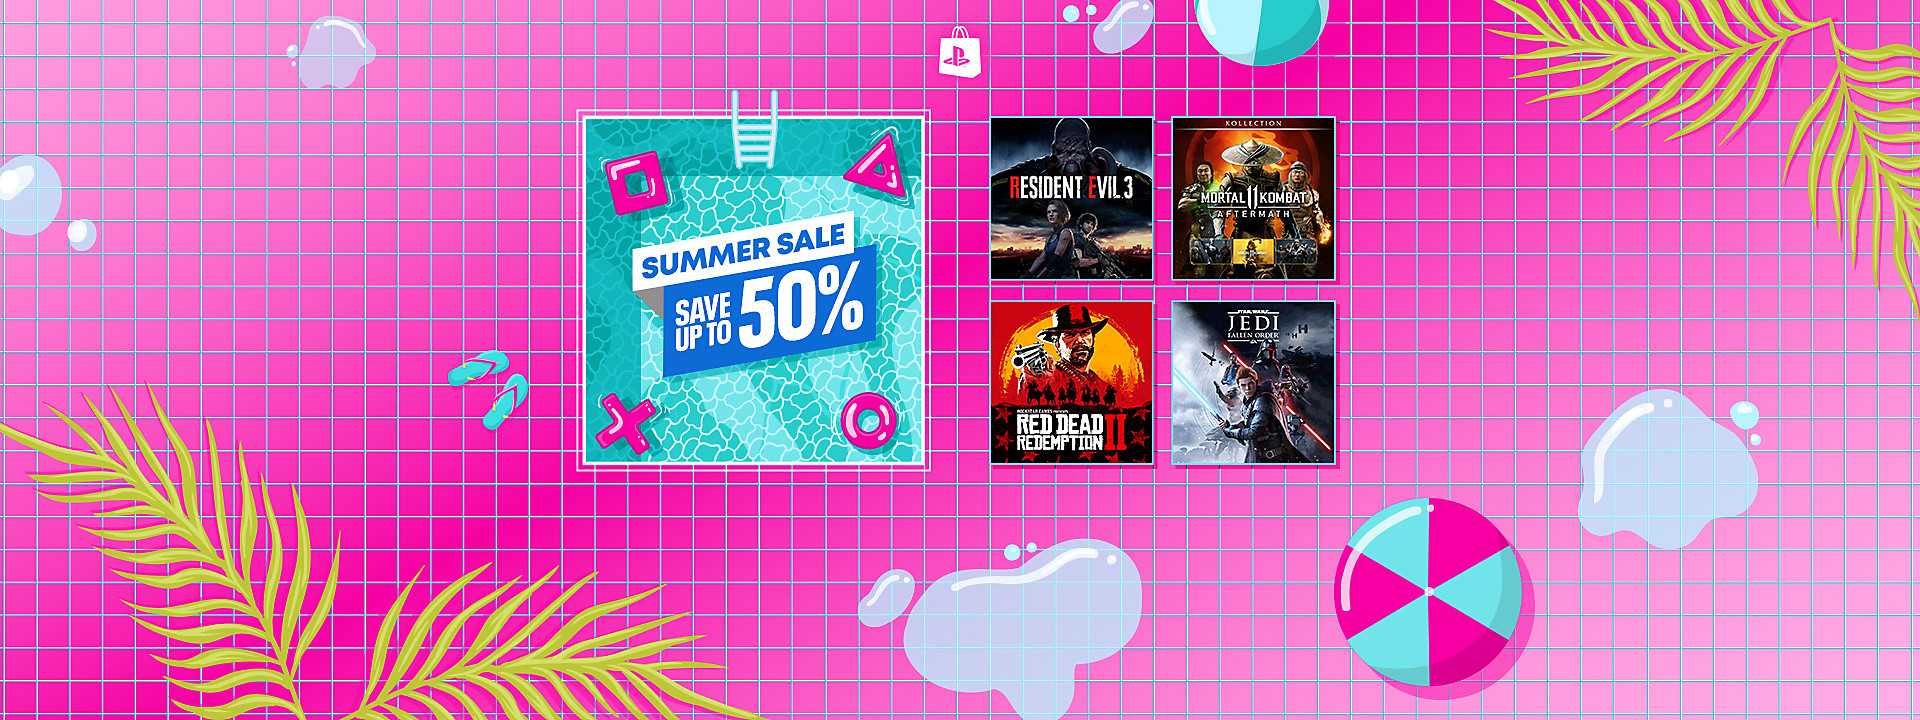 PlayStation Store - Summer Sale